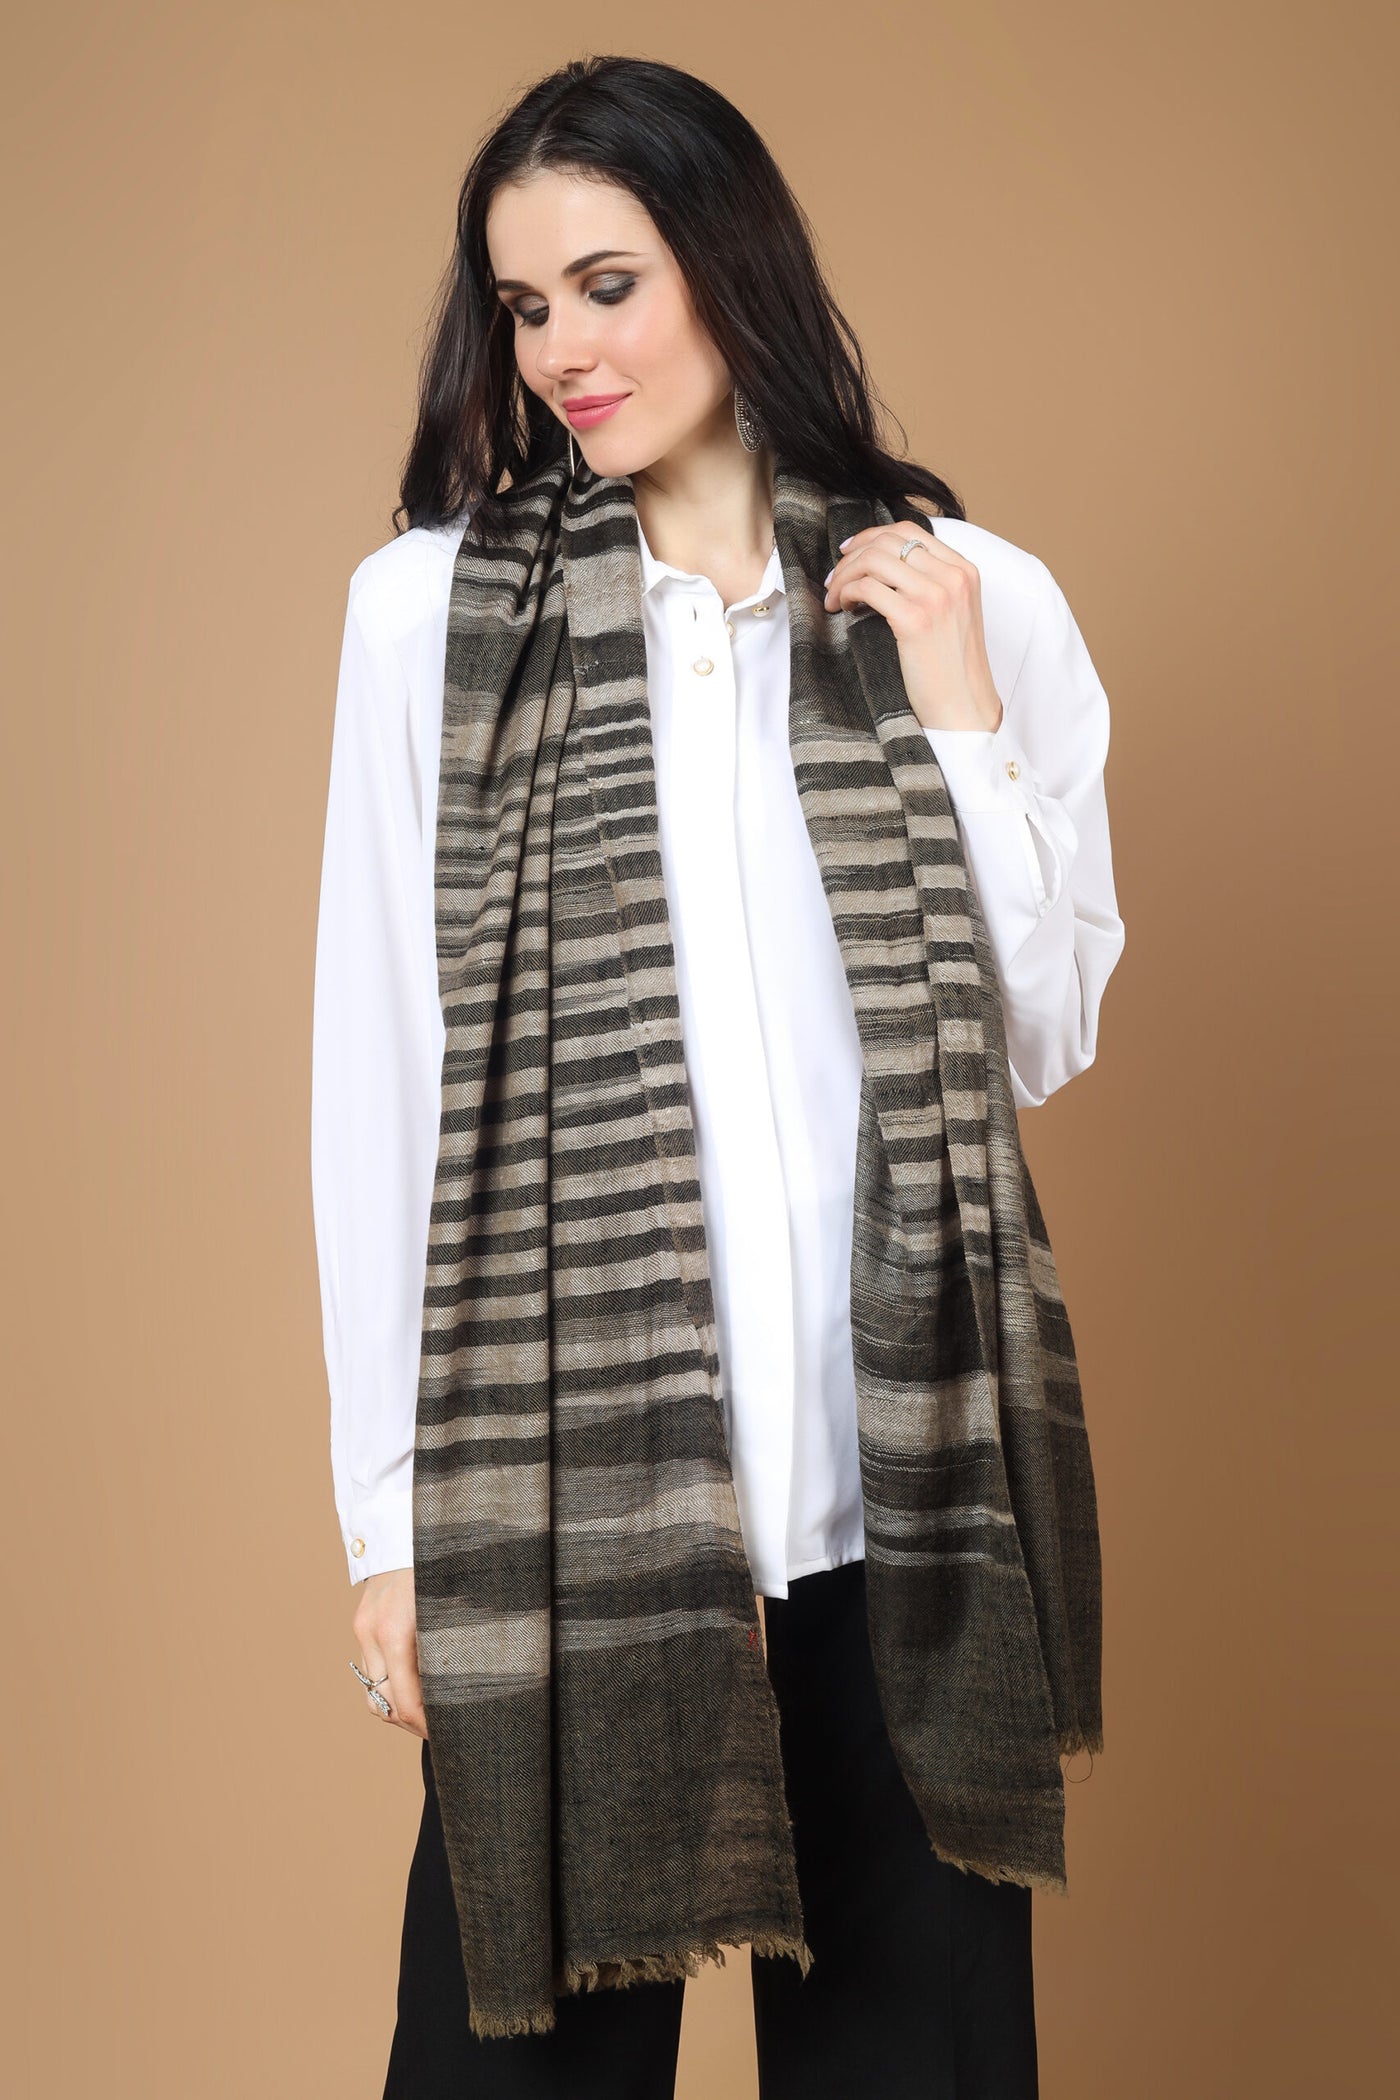 PASHMINA LONDON- luxurious winter item thanks to its exquisite ikkat design that adds elegance to any outfit.